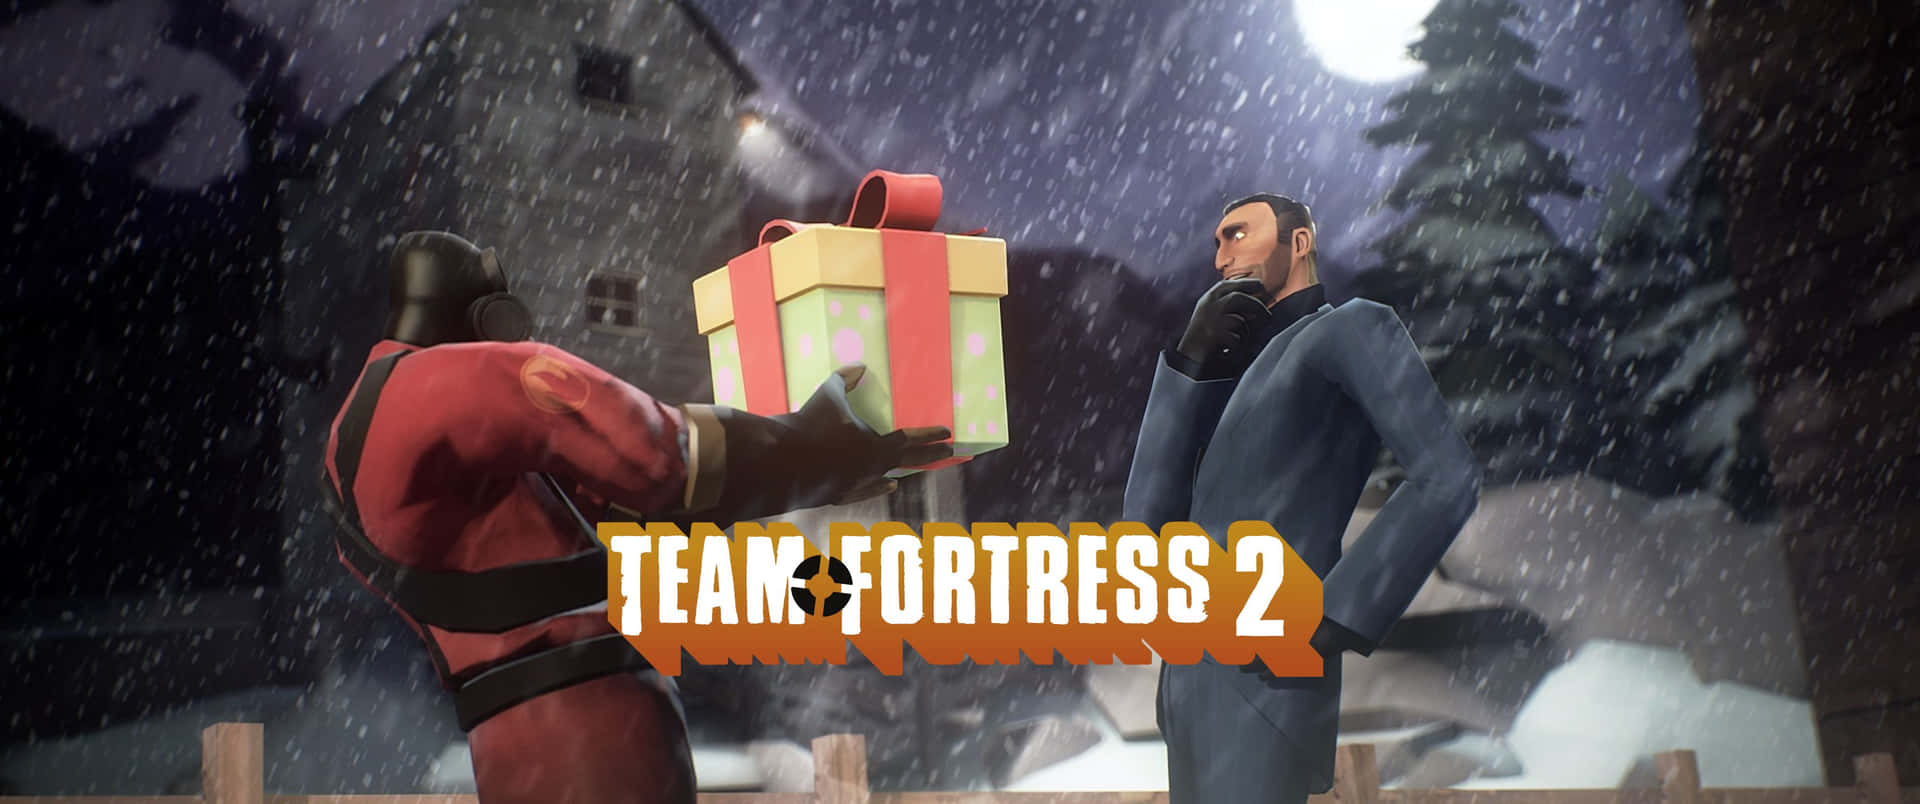 Take the battlefield with you with this 3440 x 1440p Team Fortress 2 wallpaper